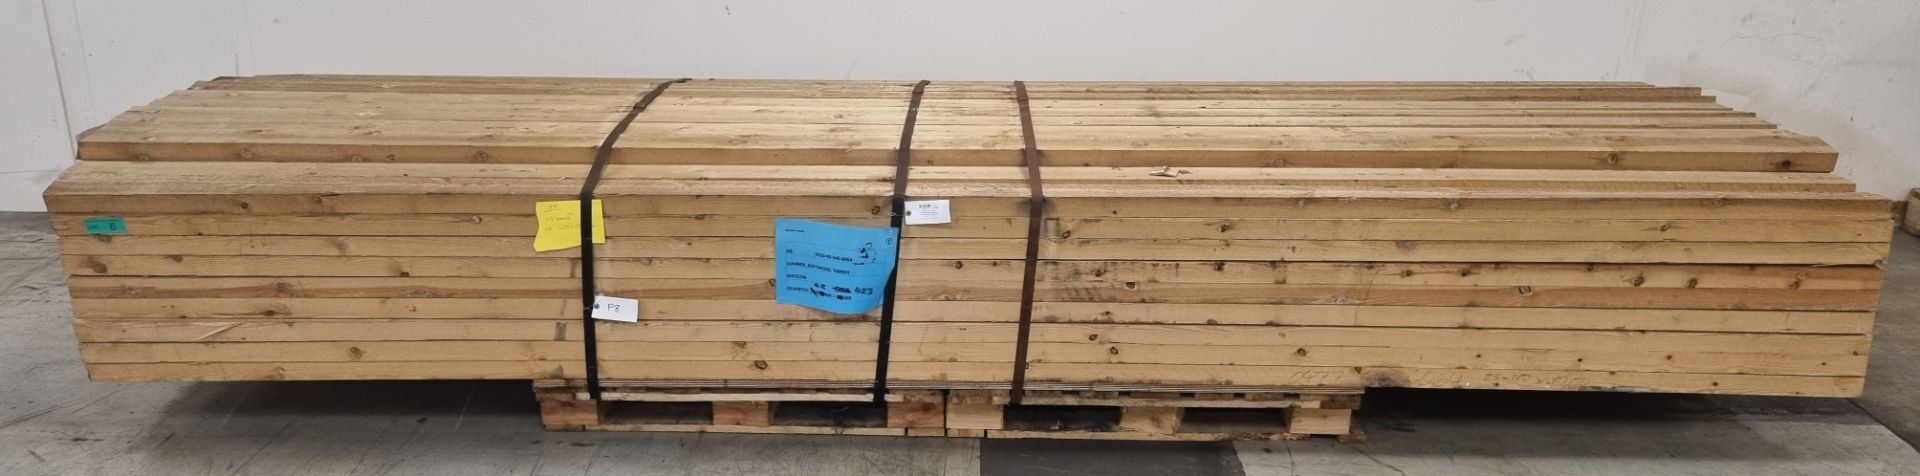 Pallet of 4"x2" (10x5cm) softwood, heat treated and debarked (GBFC-0452 DBHT) - L420cm - 115 pcs